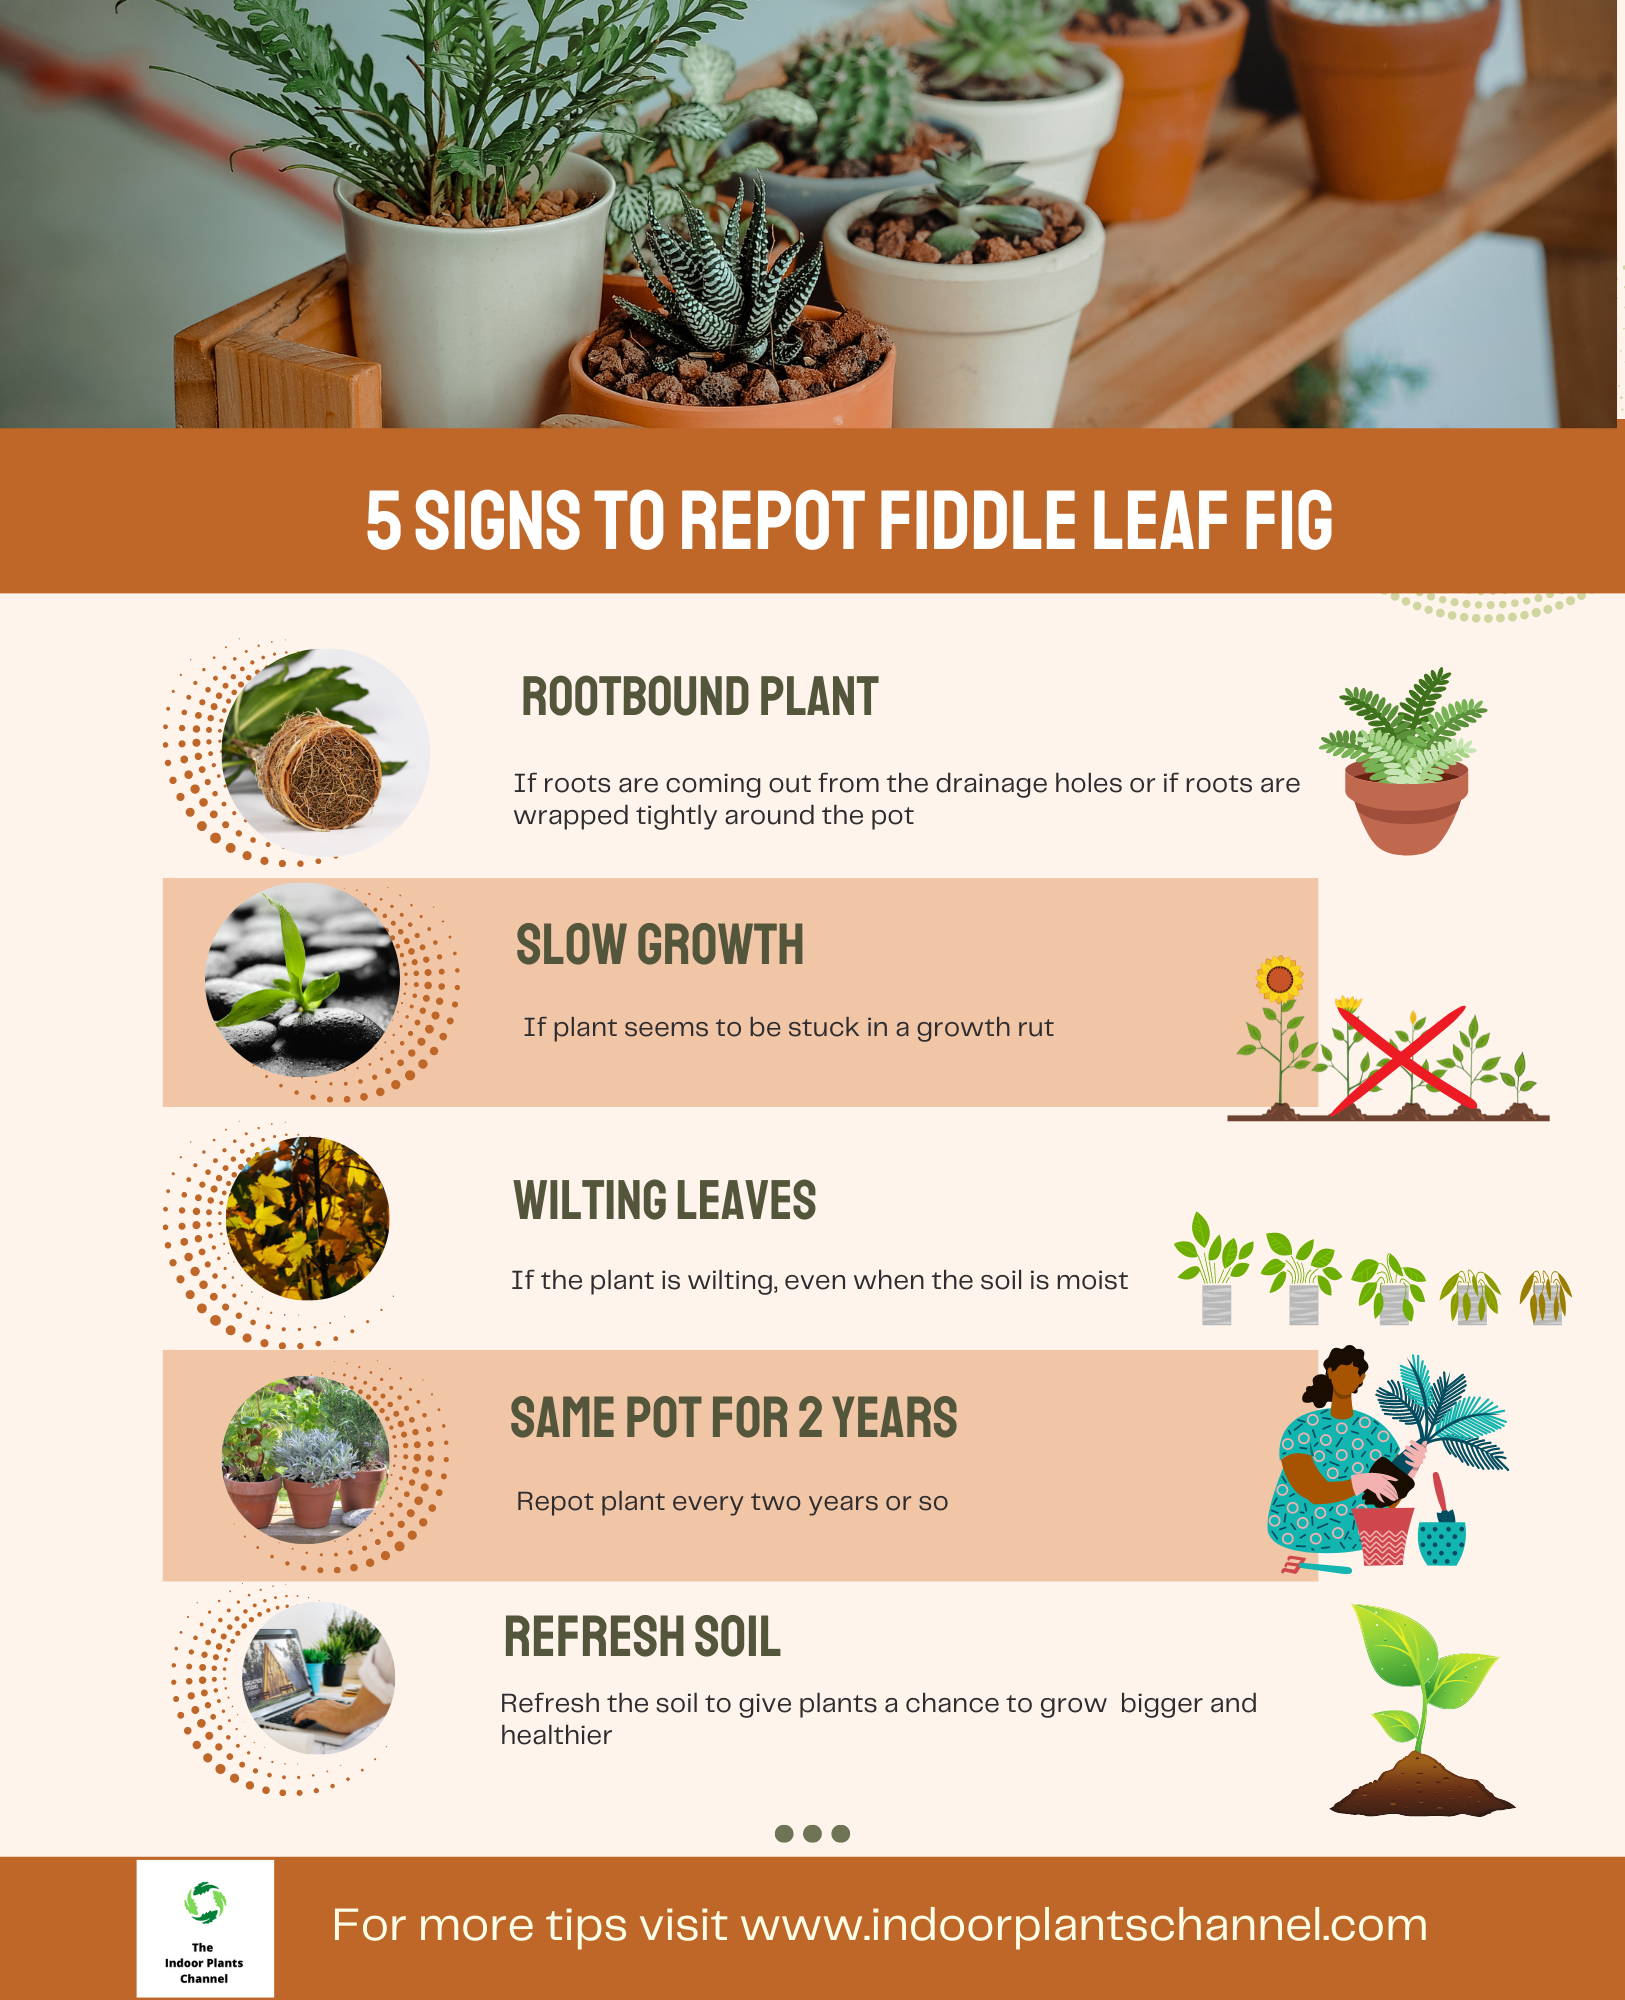 When To Repot Your Fiddle Leaf Fig